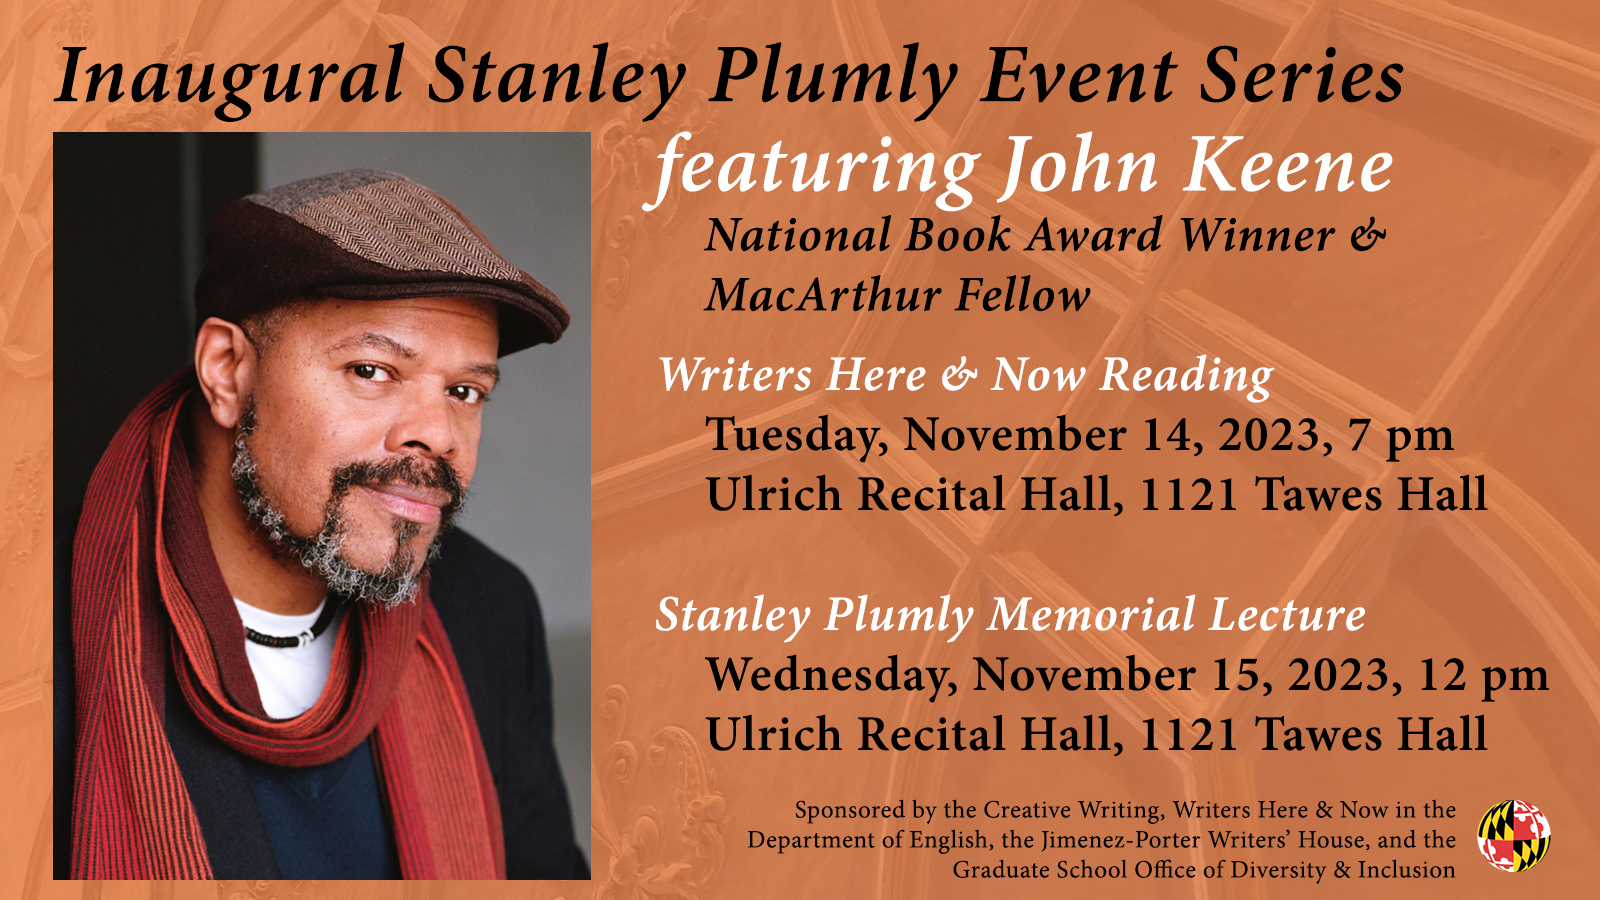 Flyer with information about John Keene event